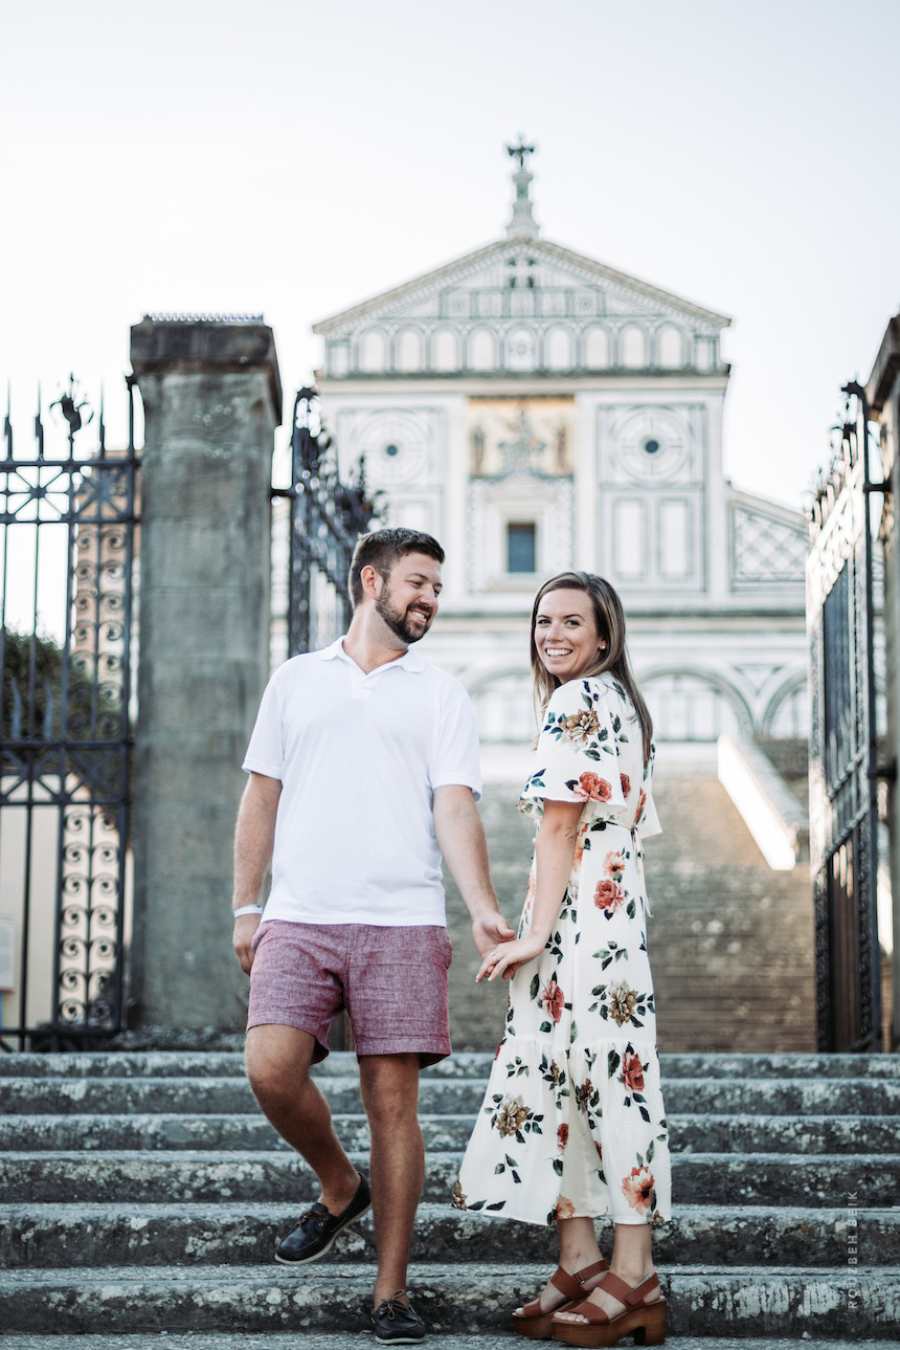 Photoshoot ideas in Florence